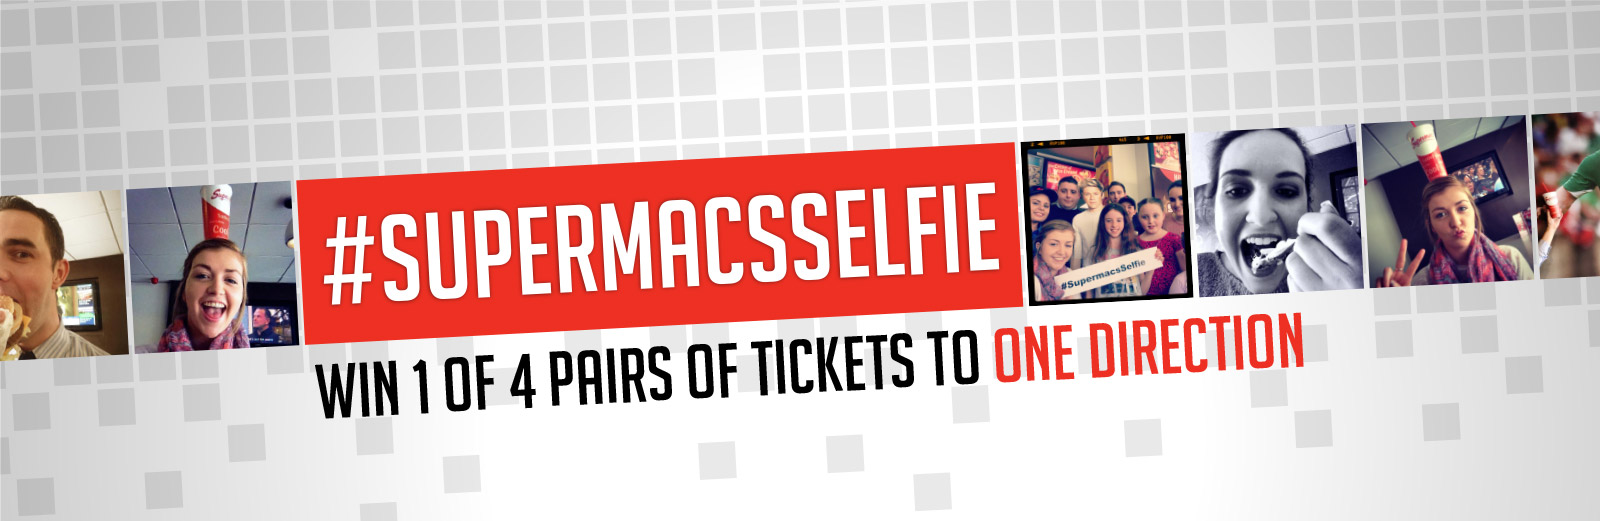 Win Tickets to One Direction with a Supermac’s Selfie!